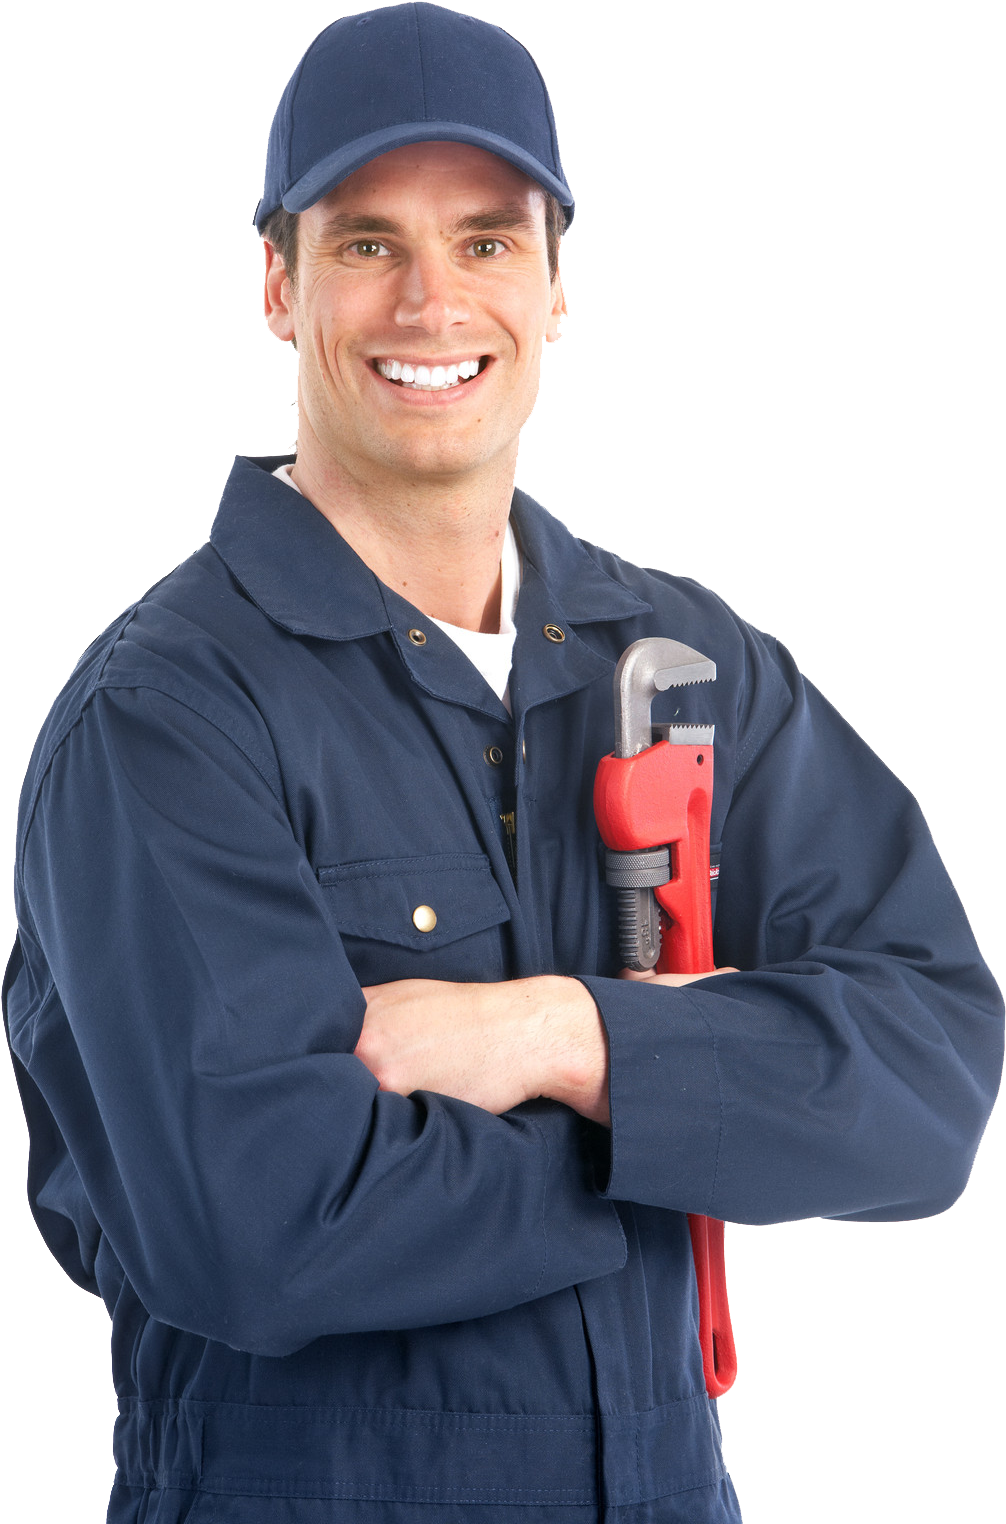 Professional Plumber Portrait With Wrench